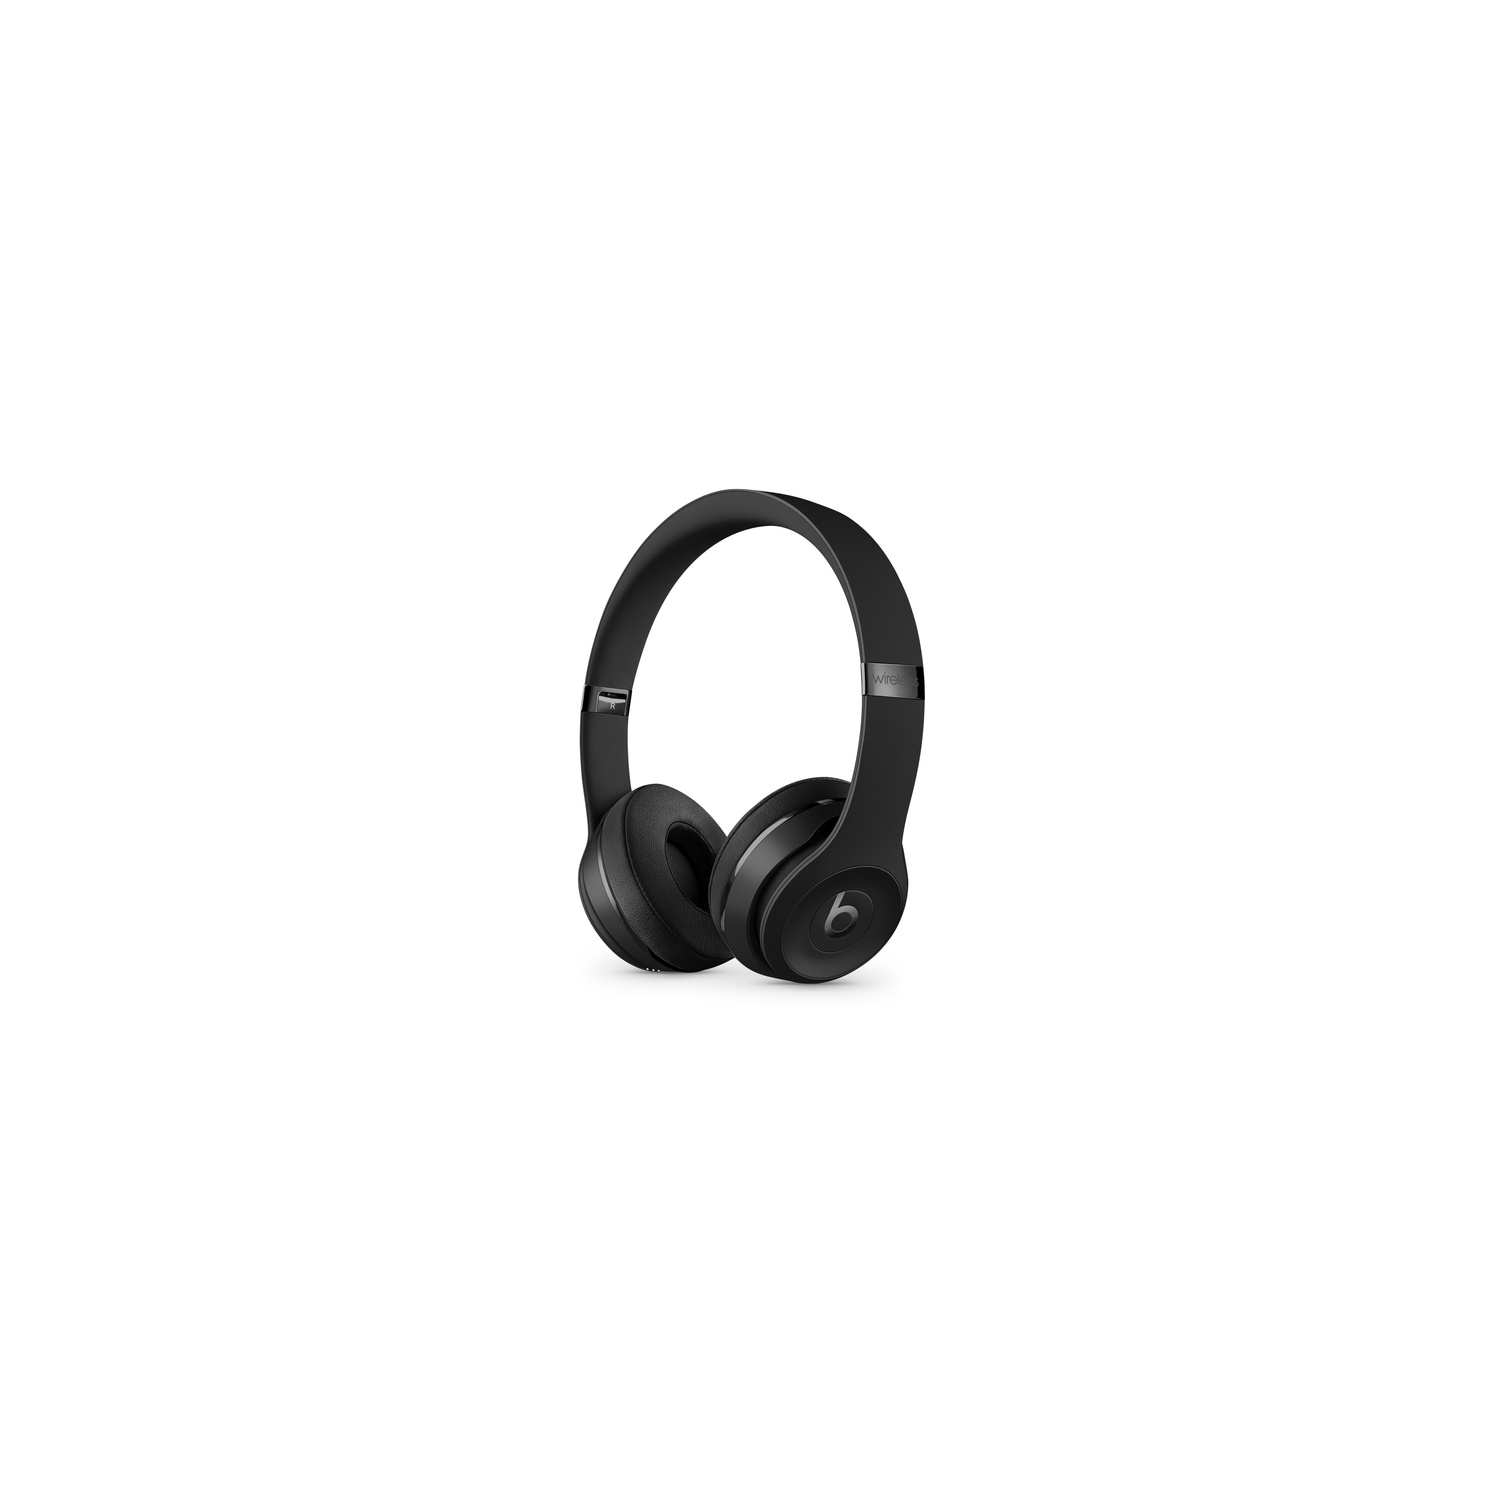 Beats by Dr. Dre Solo3 On-Ear Sound Isolating Bluetooth Headphones - Black - Refurbished (Good)